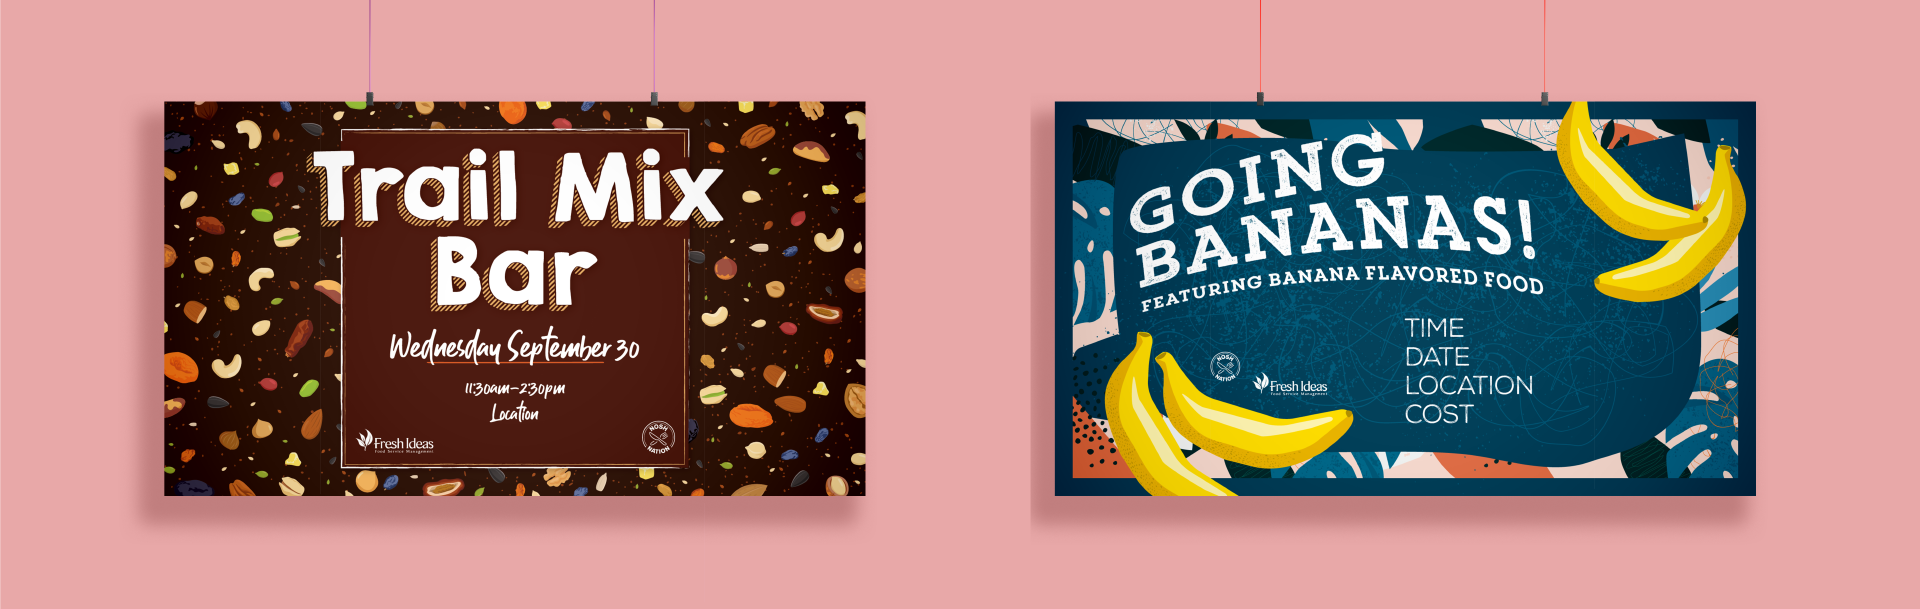 2 horizontal food event posters. One advertising a trail mix bar, the other a banana themed event.